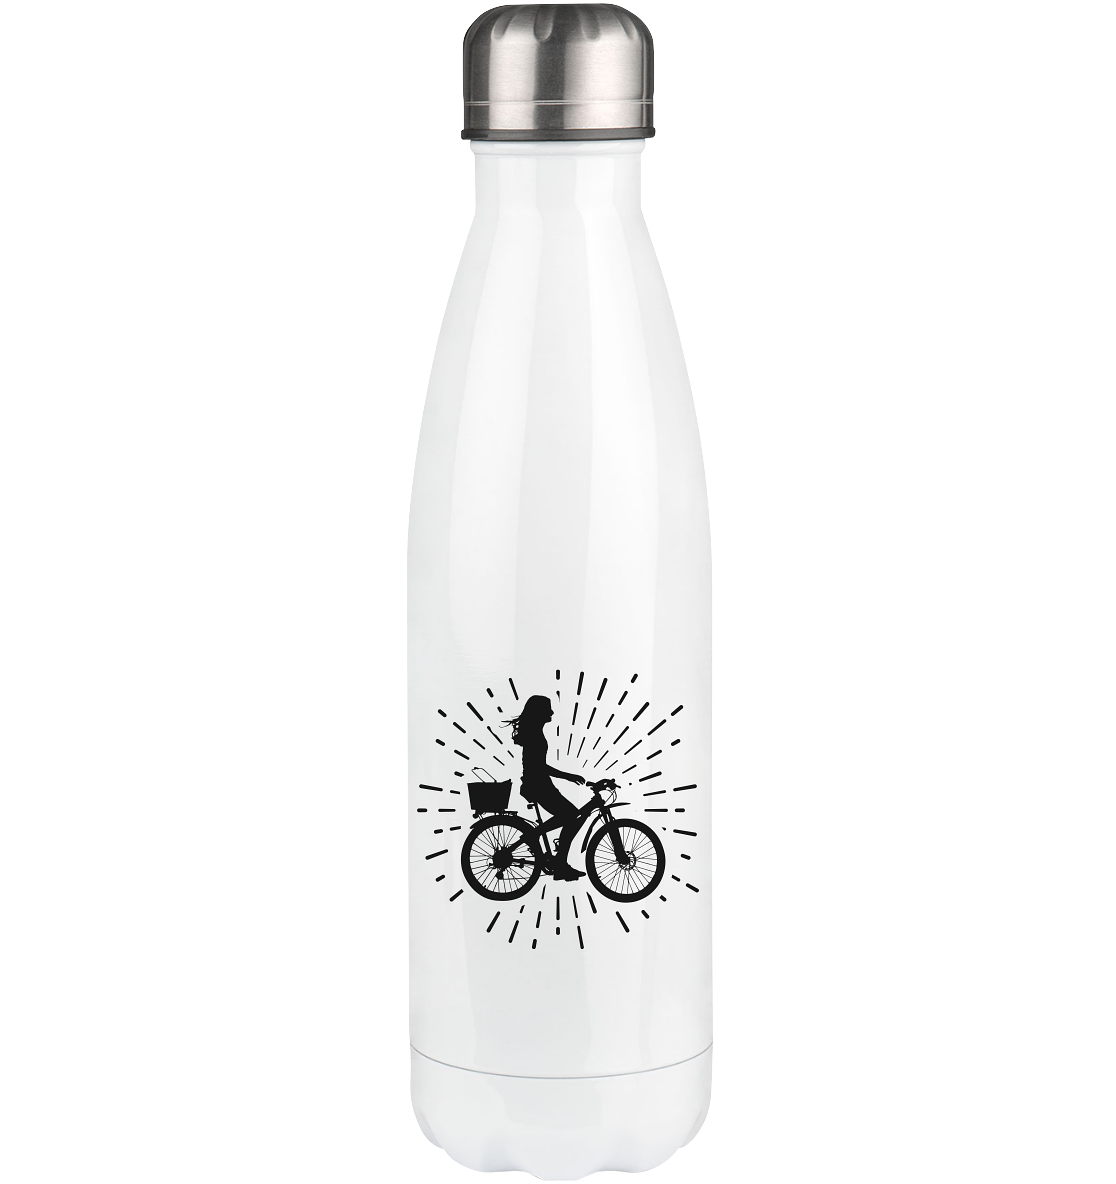 Firework and Cycling 2 - Edelstahl Thermosflasche fahrrad 500ml